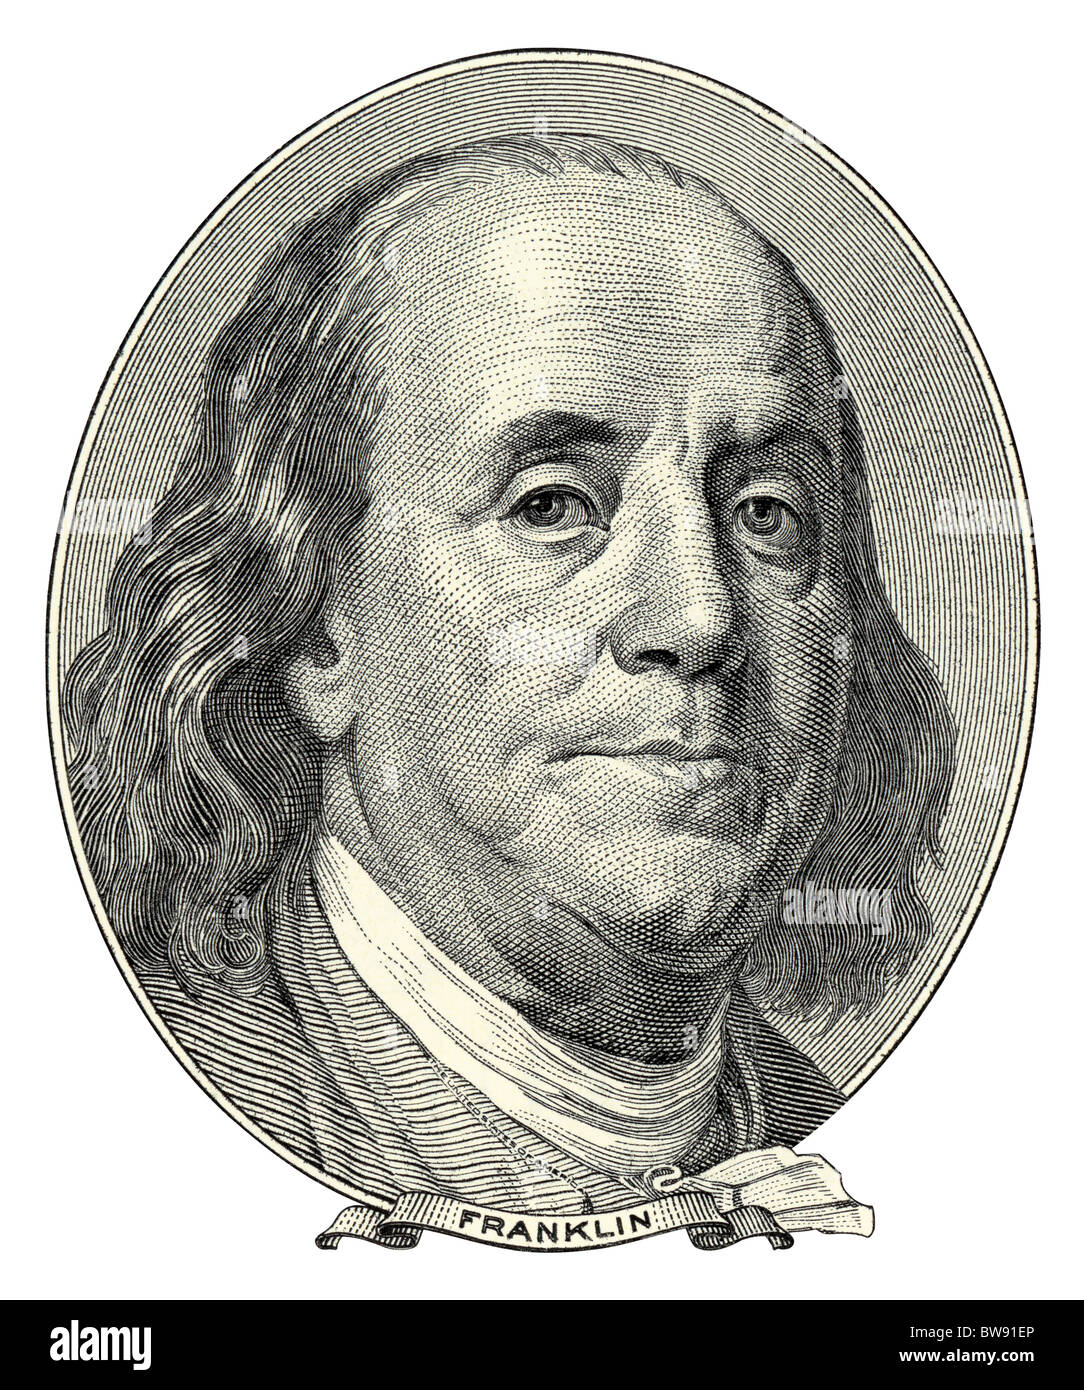 Portrait of Benjamin Franklin as he looks on one hundred dollar bill obverse. NATIVE SIZE NOT UPSCALE. Stock Photo